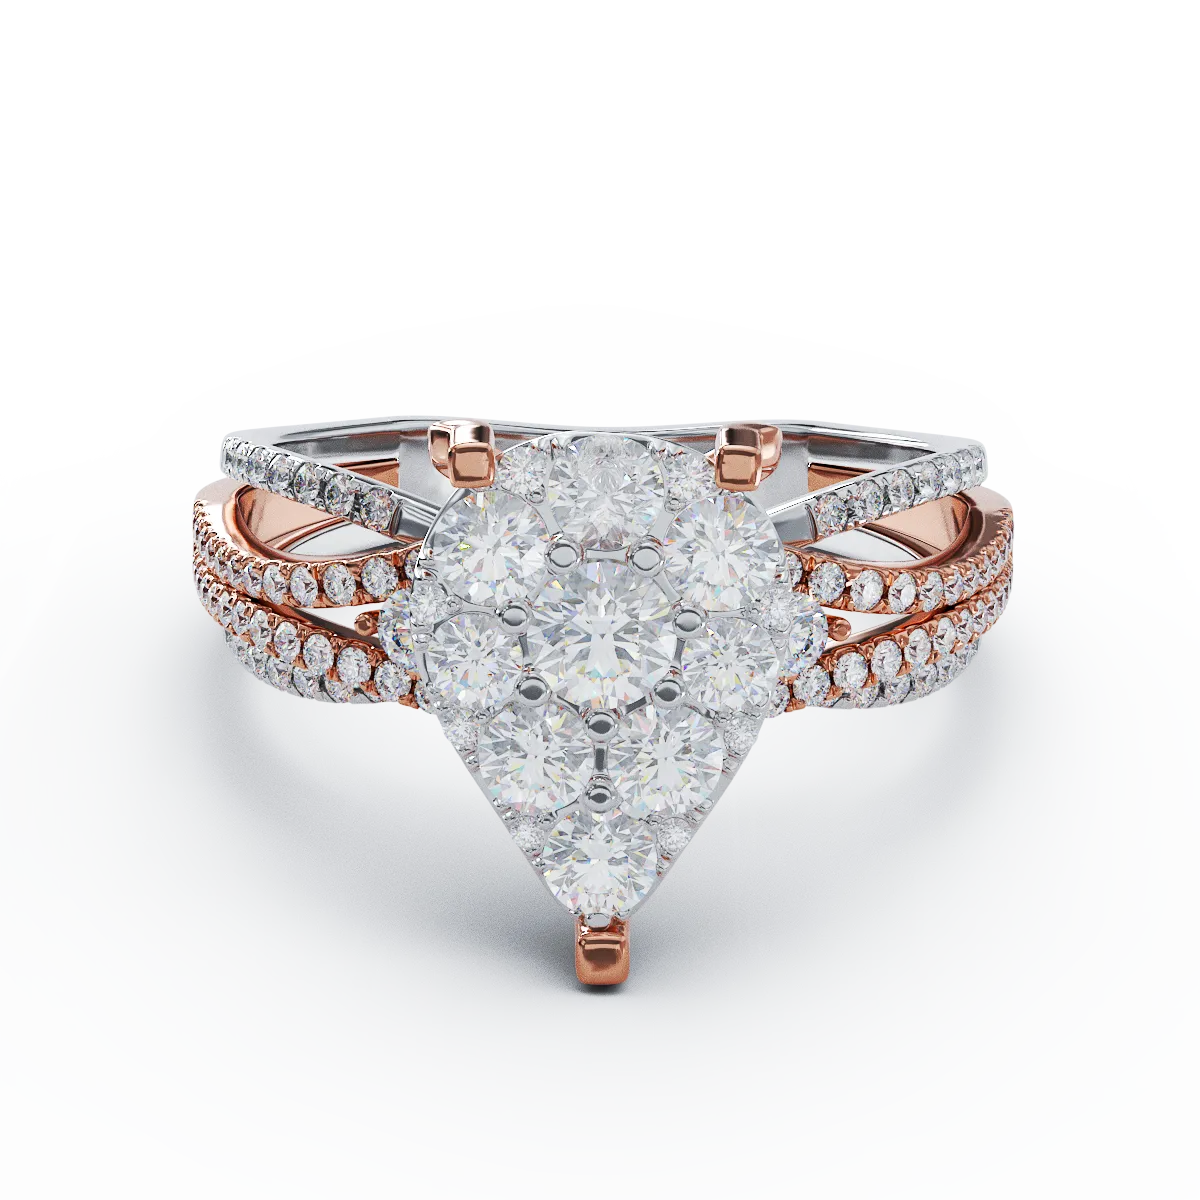 18K white-rose gold engagement ring with 0.95ct diamonds